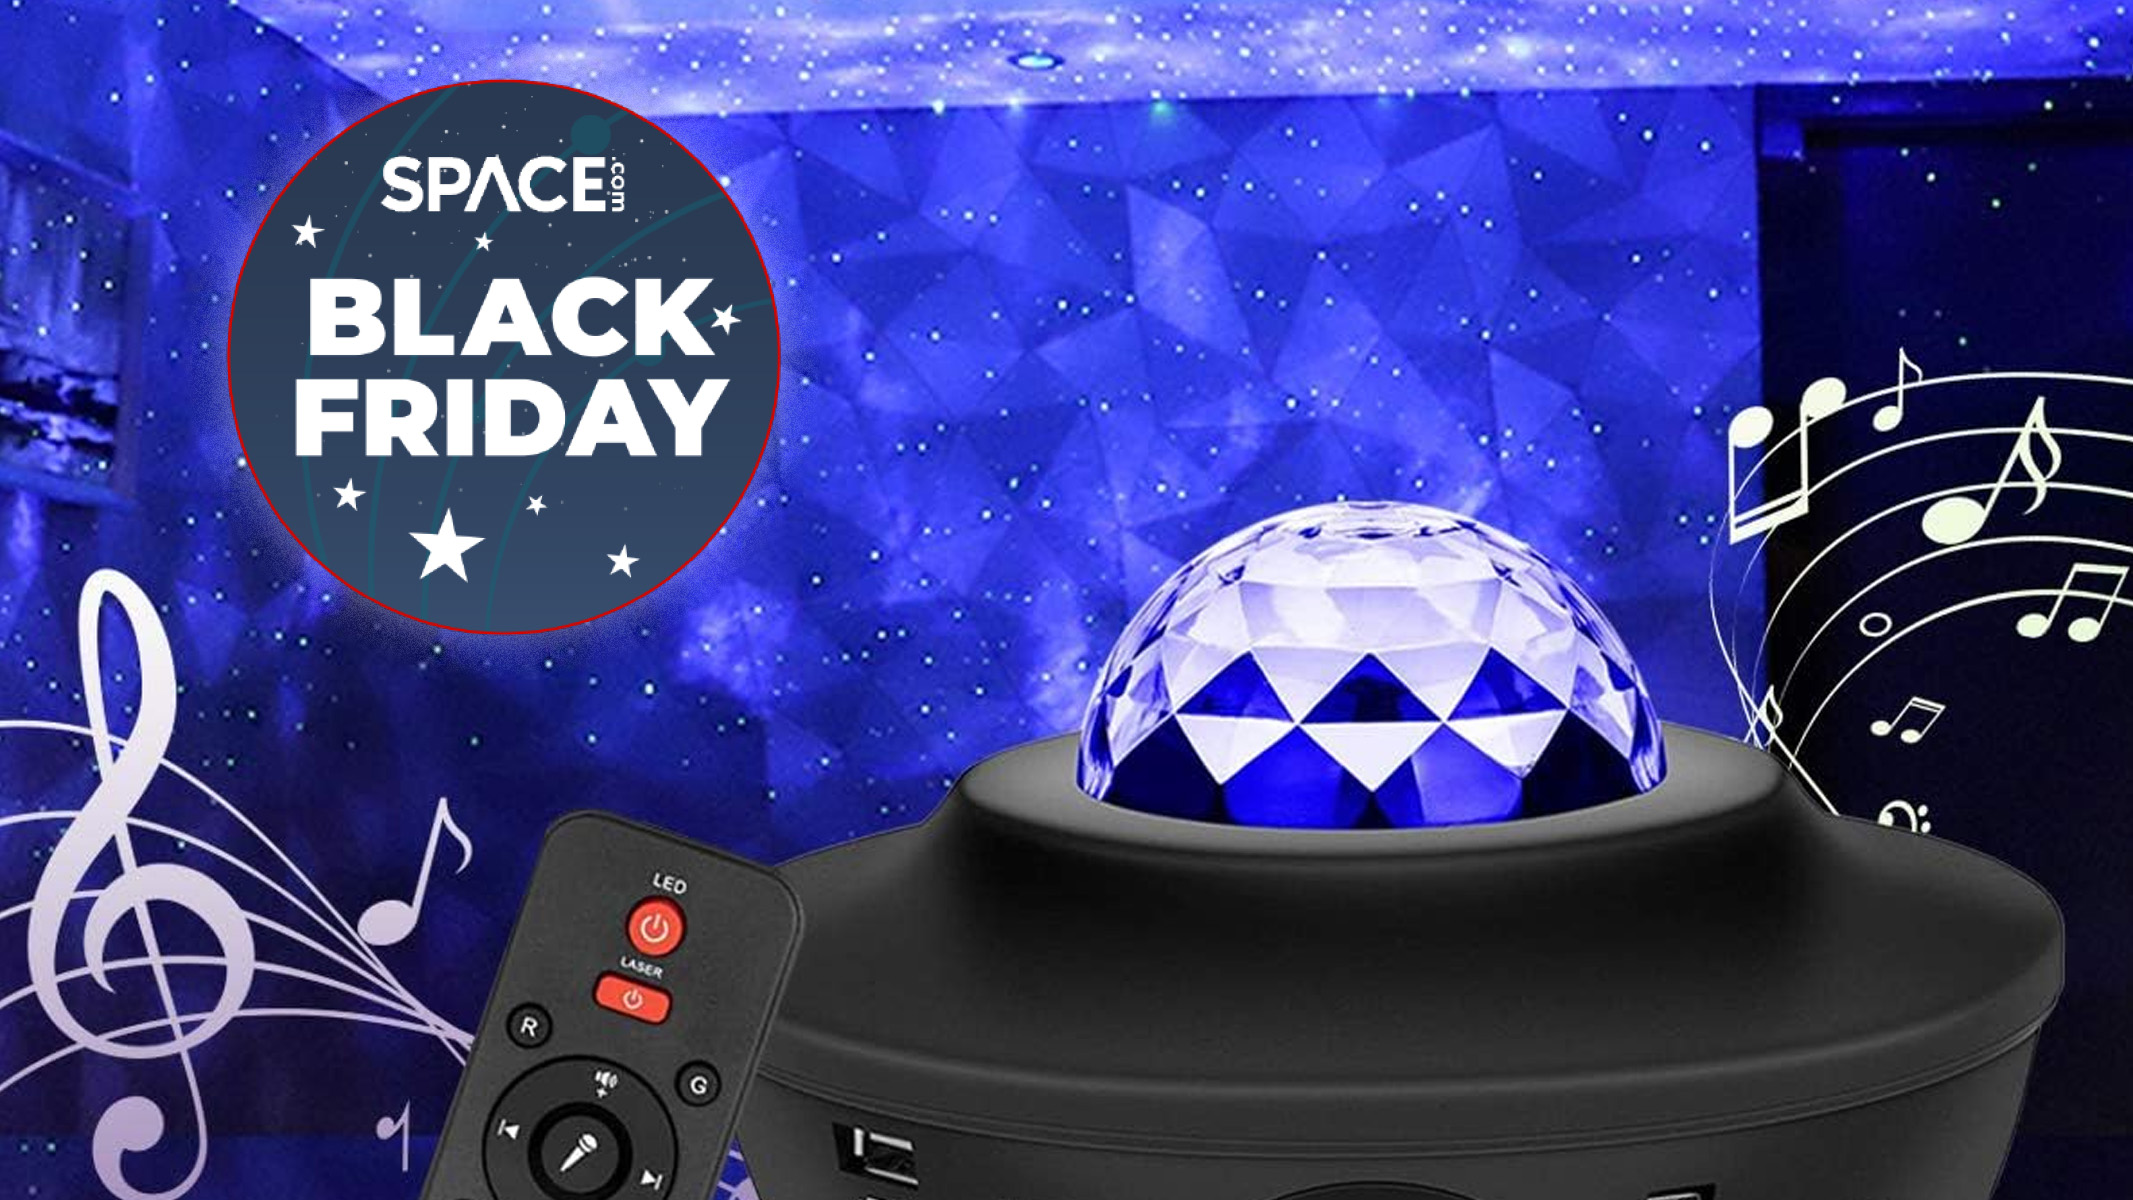 Grab a mesmerizing star projector for less than $20 this Black Friday